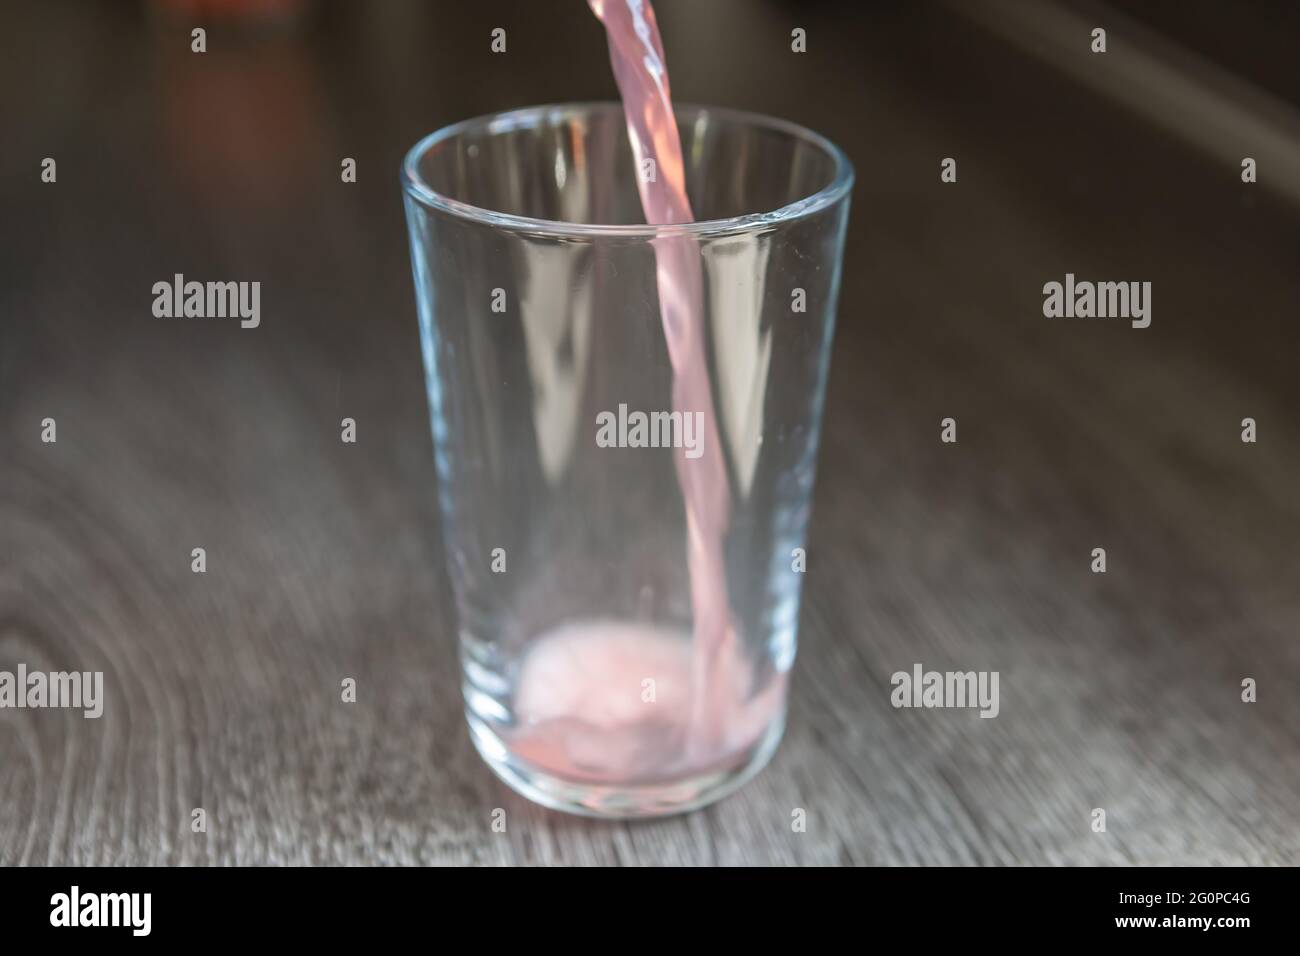 Pouring a drink Stock Photo